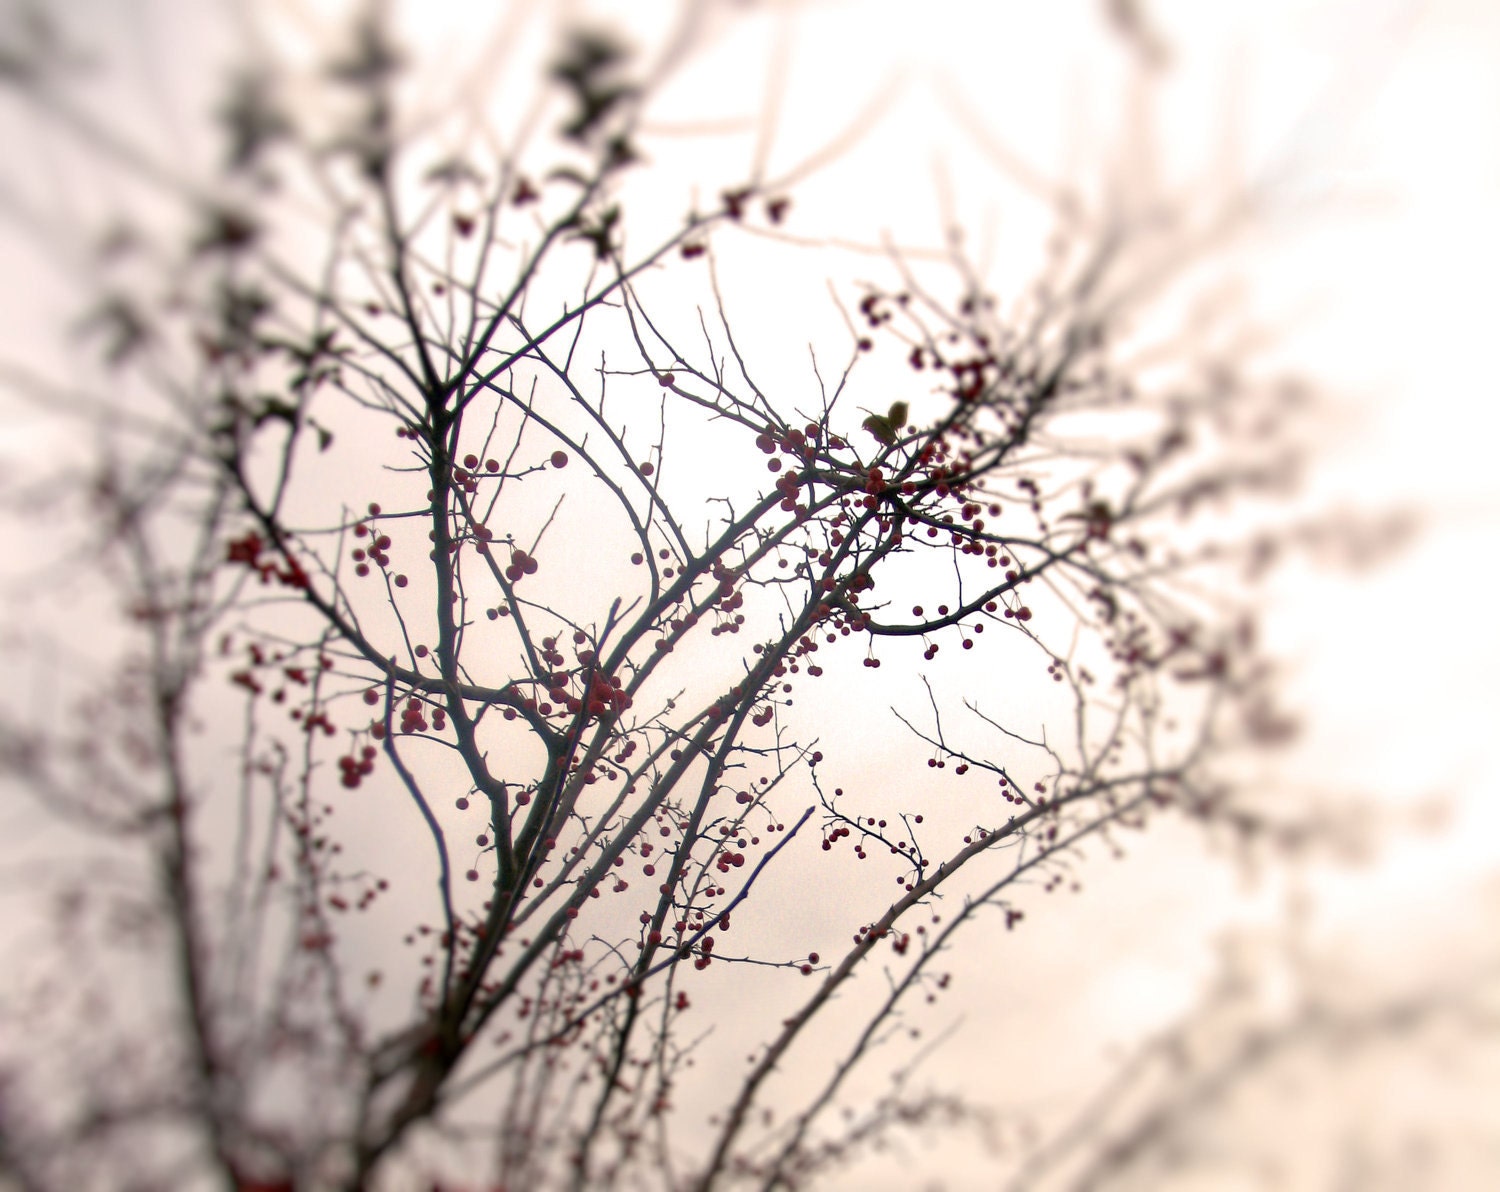 Fine Art Photography Red Berries and Branches Winter Holiday Gift Christmas Home Decor Soft Focus Ethereal Poe Team Altered 8X10 - AJoyfulStudio